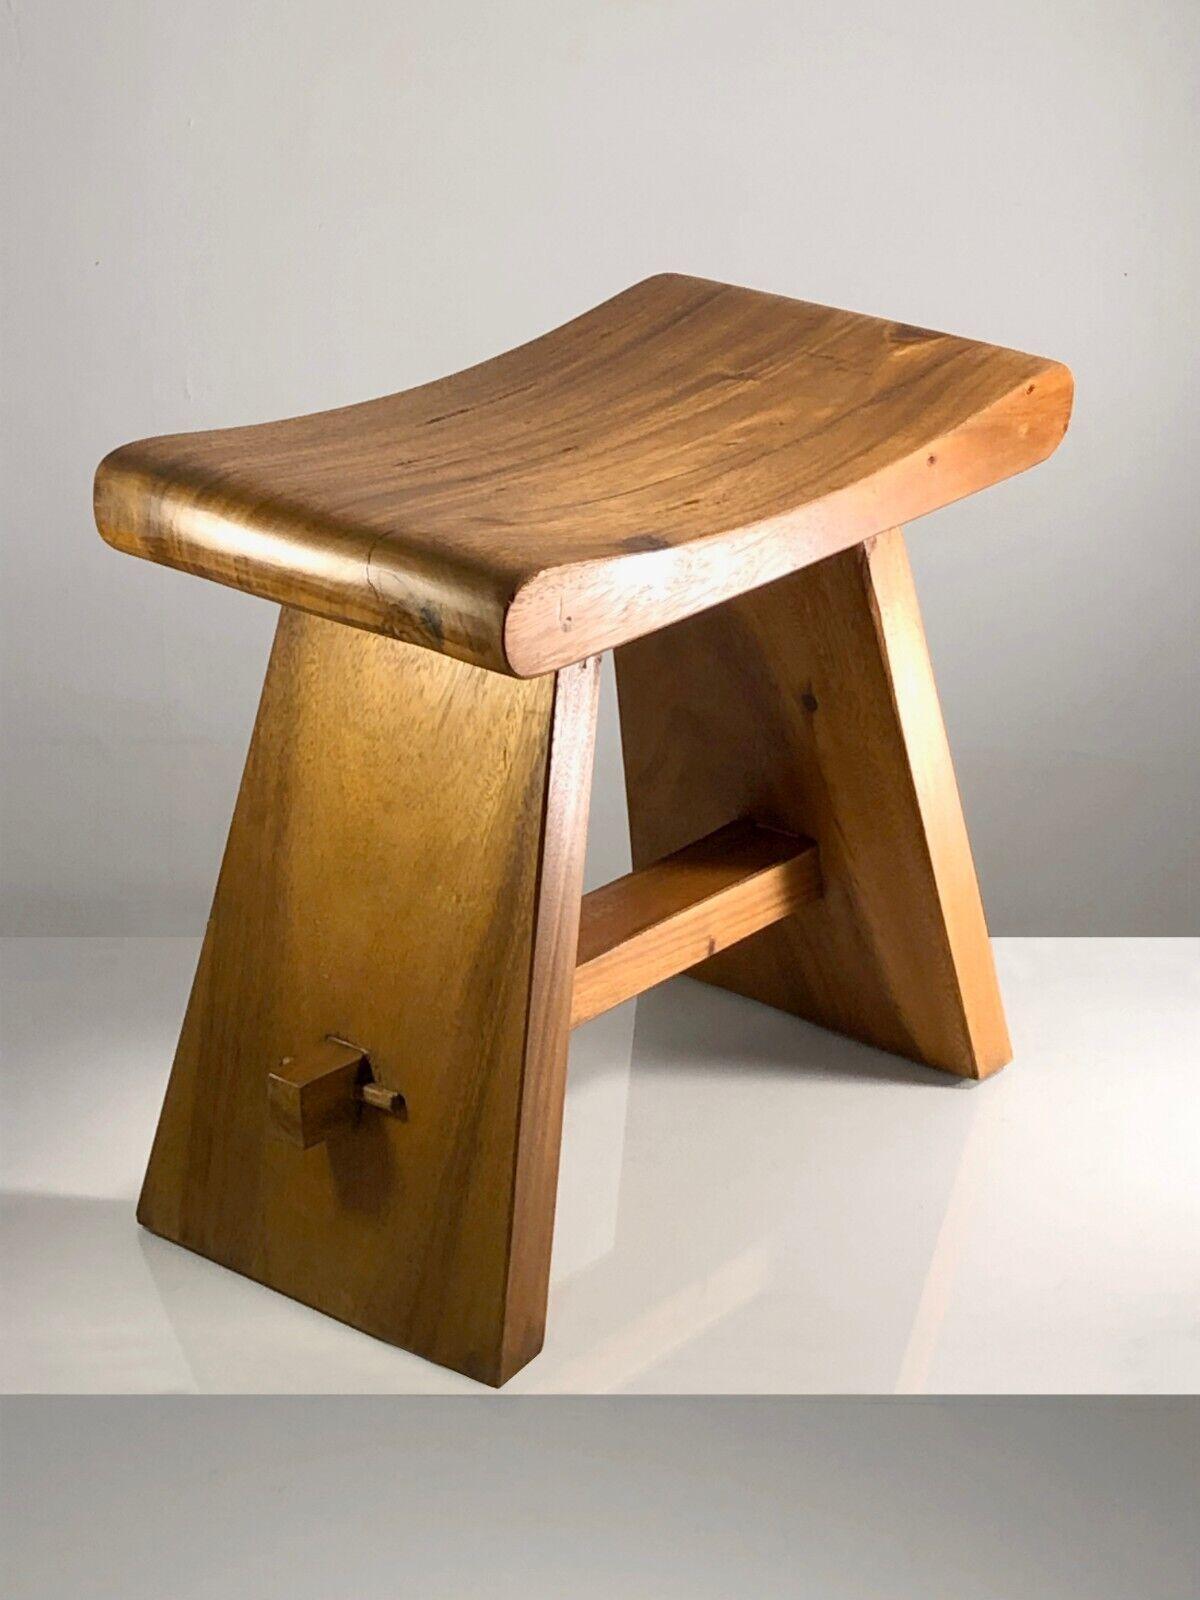 A Sculptural MID-CENTURY-MODERN RUSTIC STOOL, PIERRE CHAPO Style, France 1950 For Sale 3